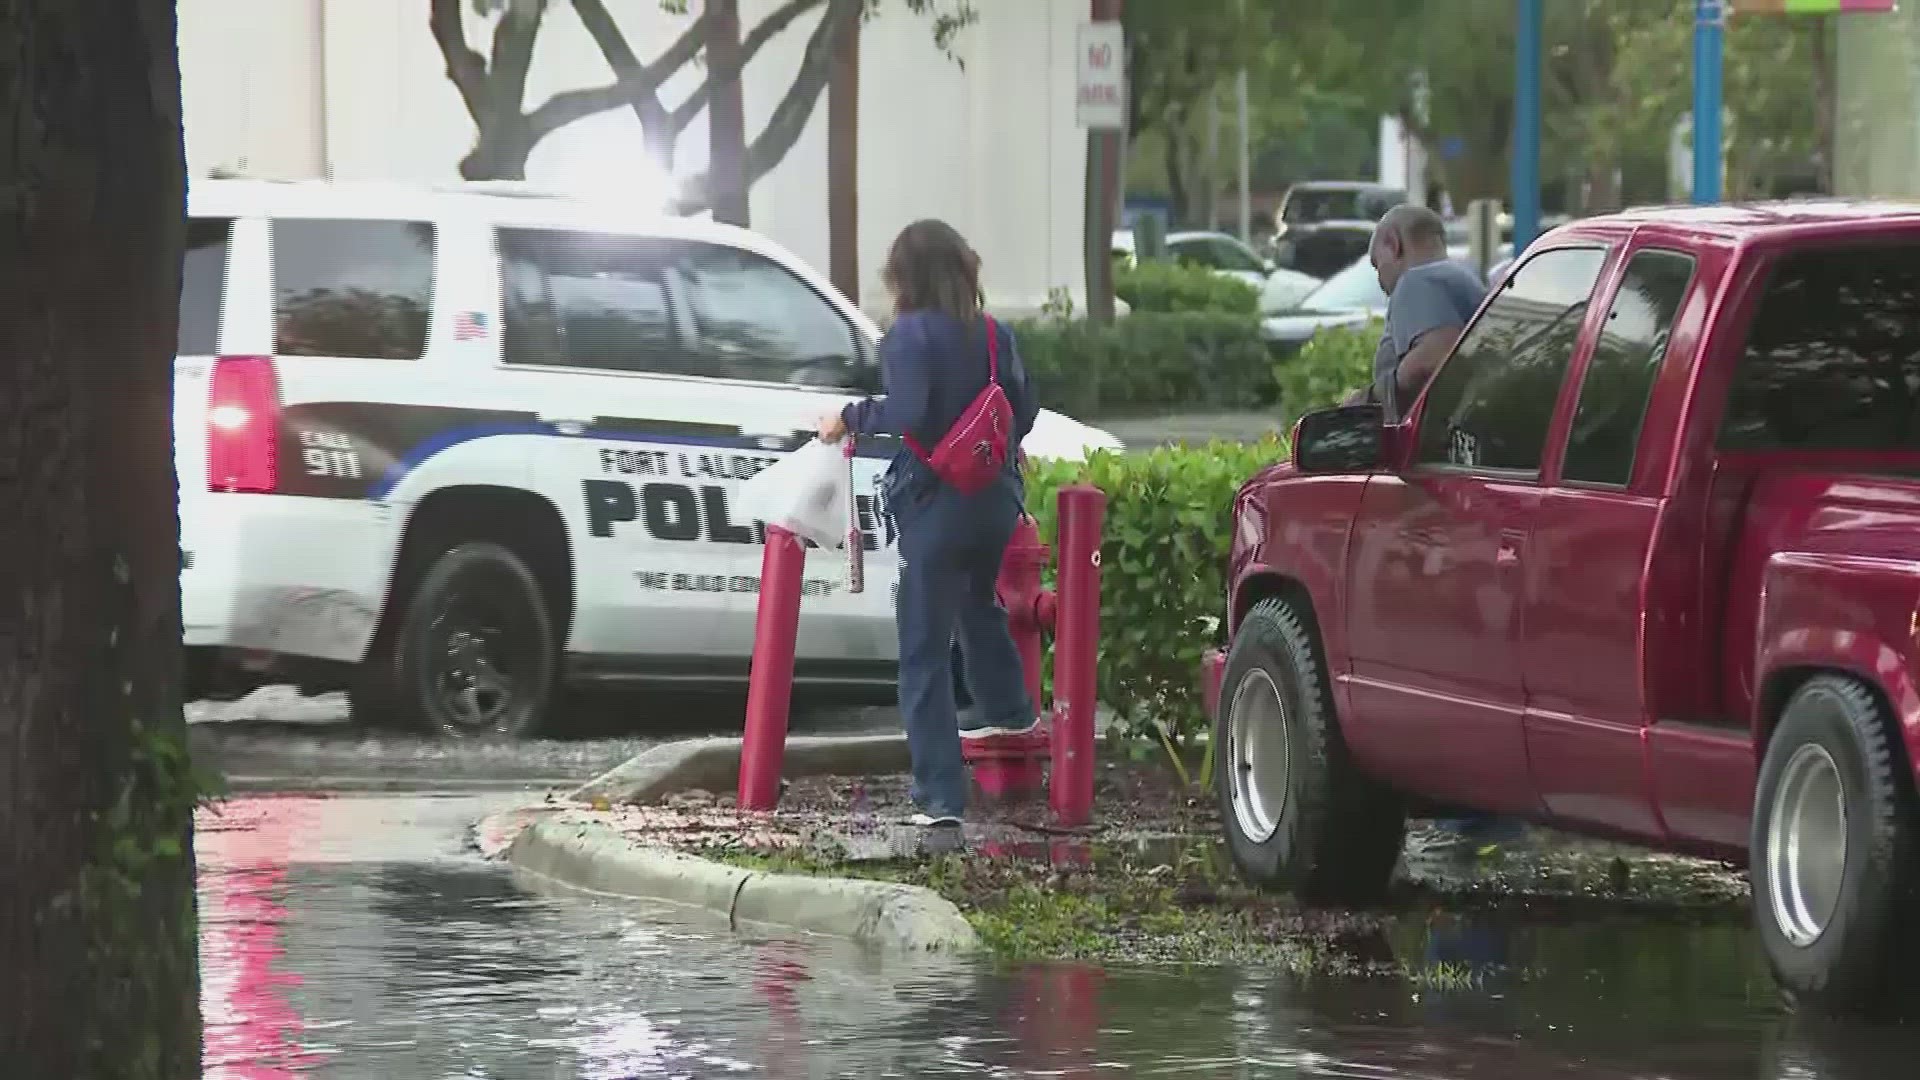 The city of Fort Lauderdale released a statement Wednesday evening urging residents and visitors to stay off the roads until the water has subsided.